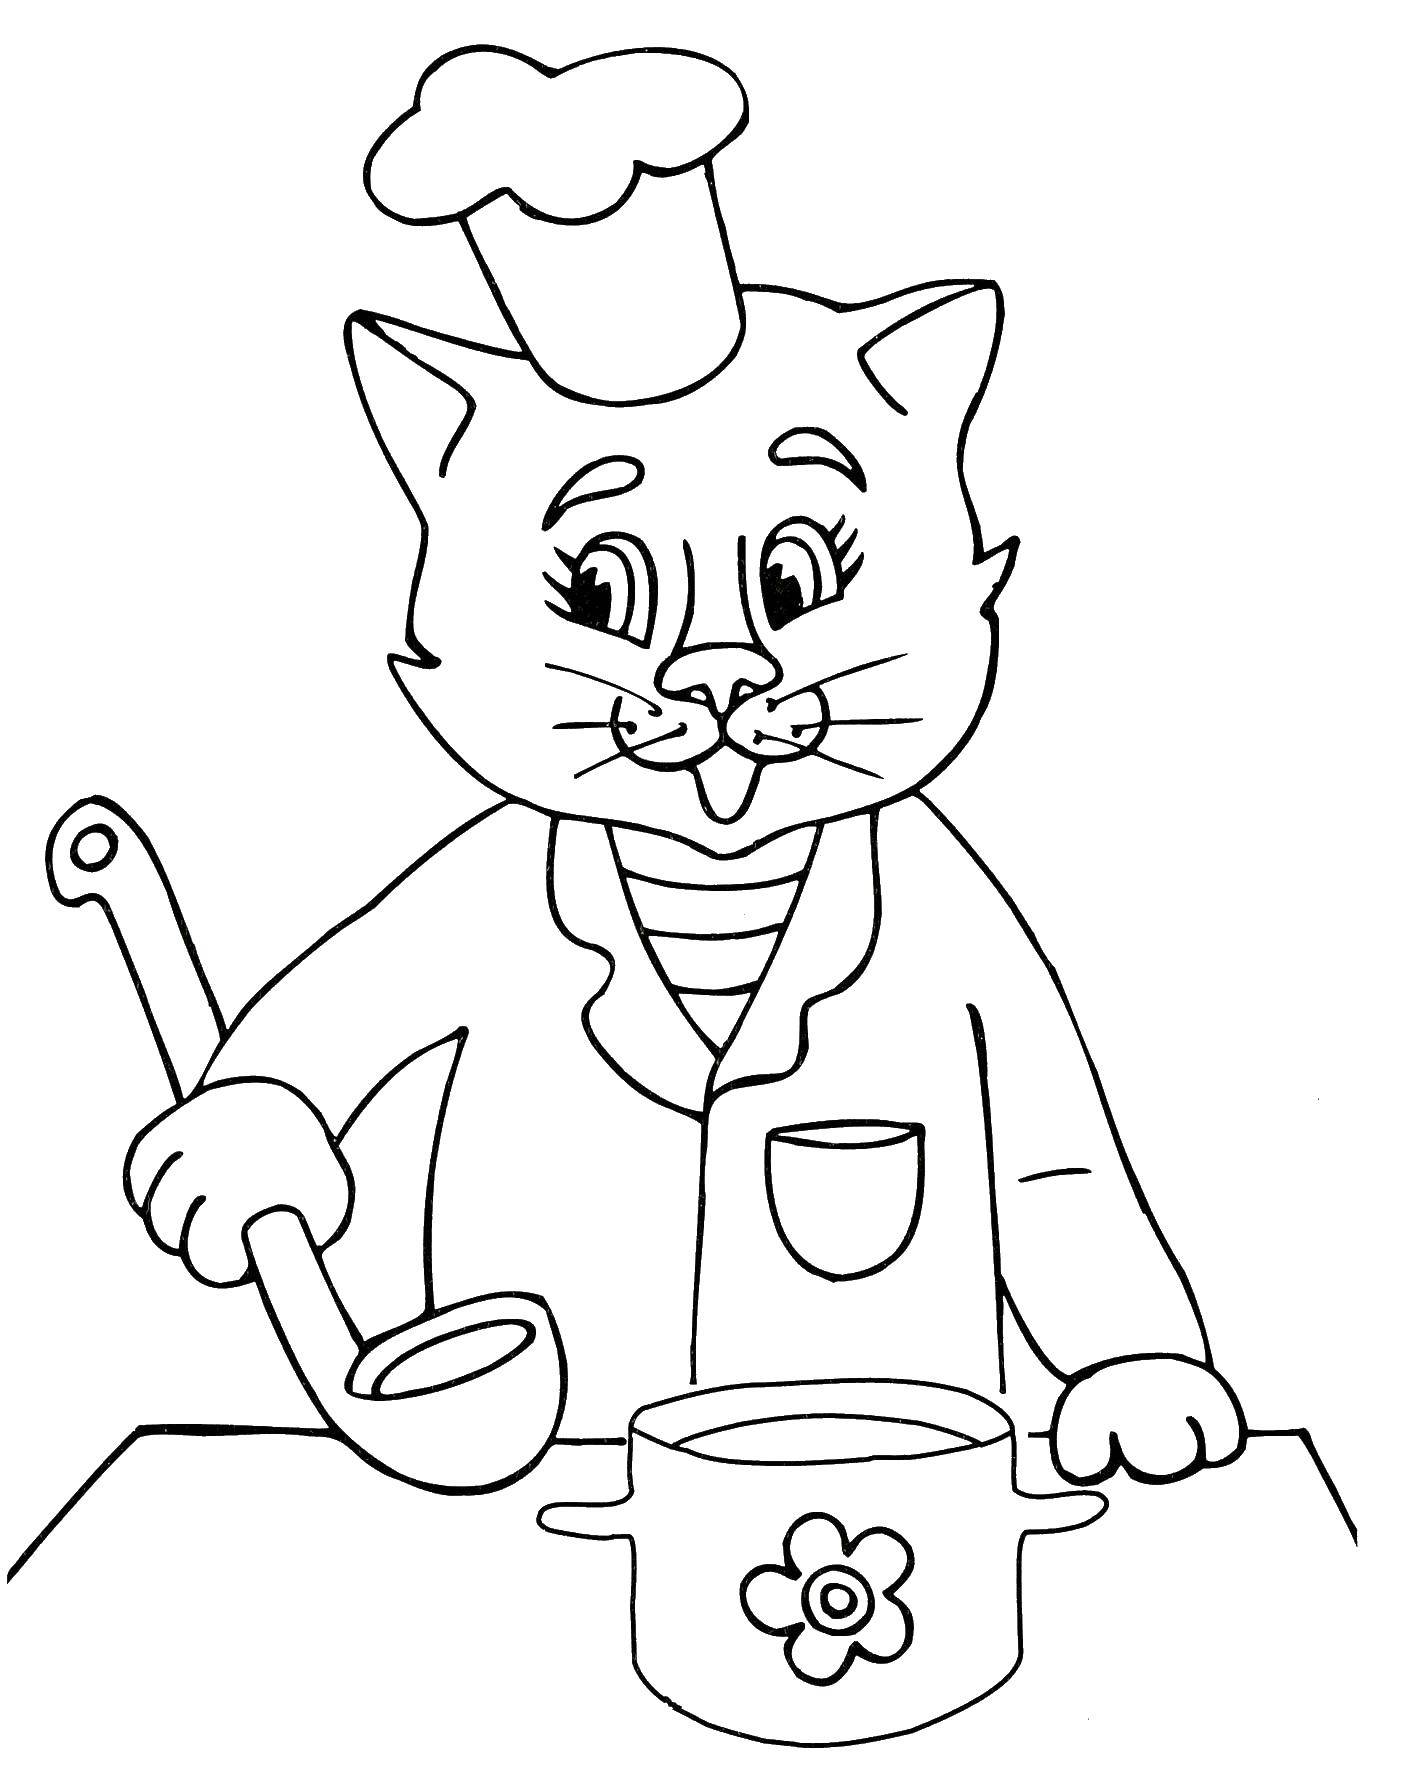 Coloring Cat chef. Category Animals. Tags:  Animals, cat.